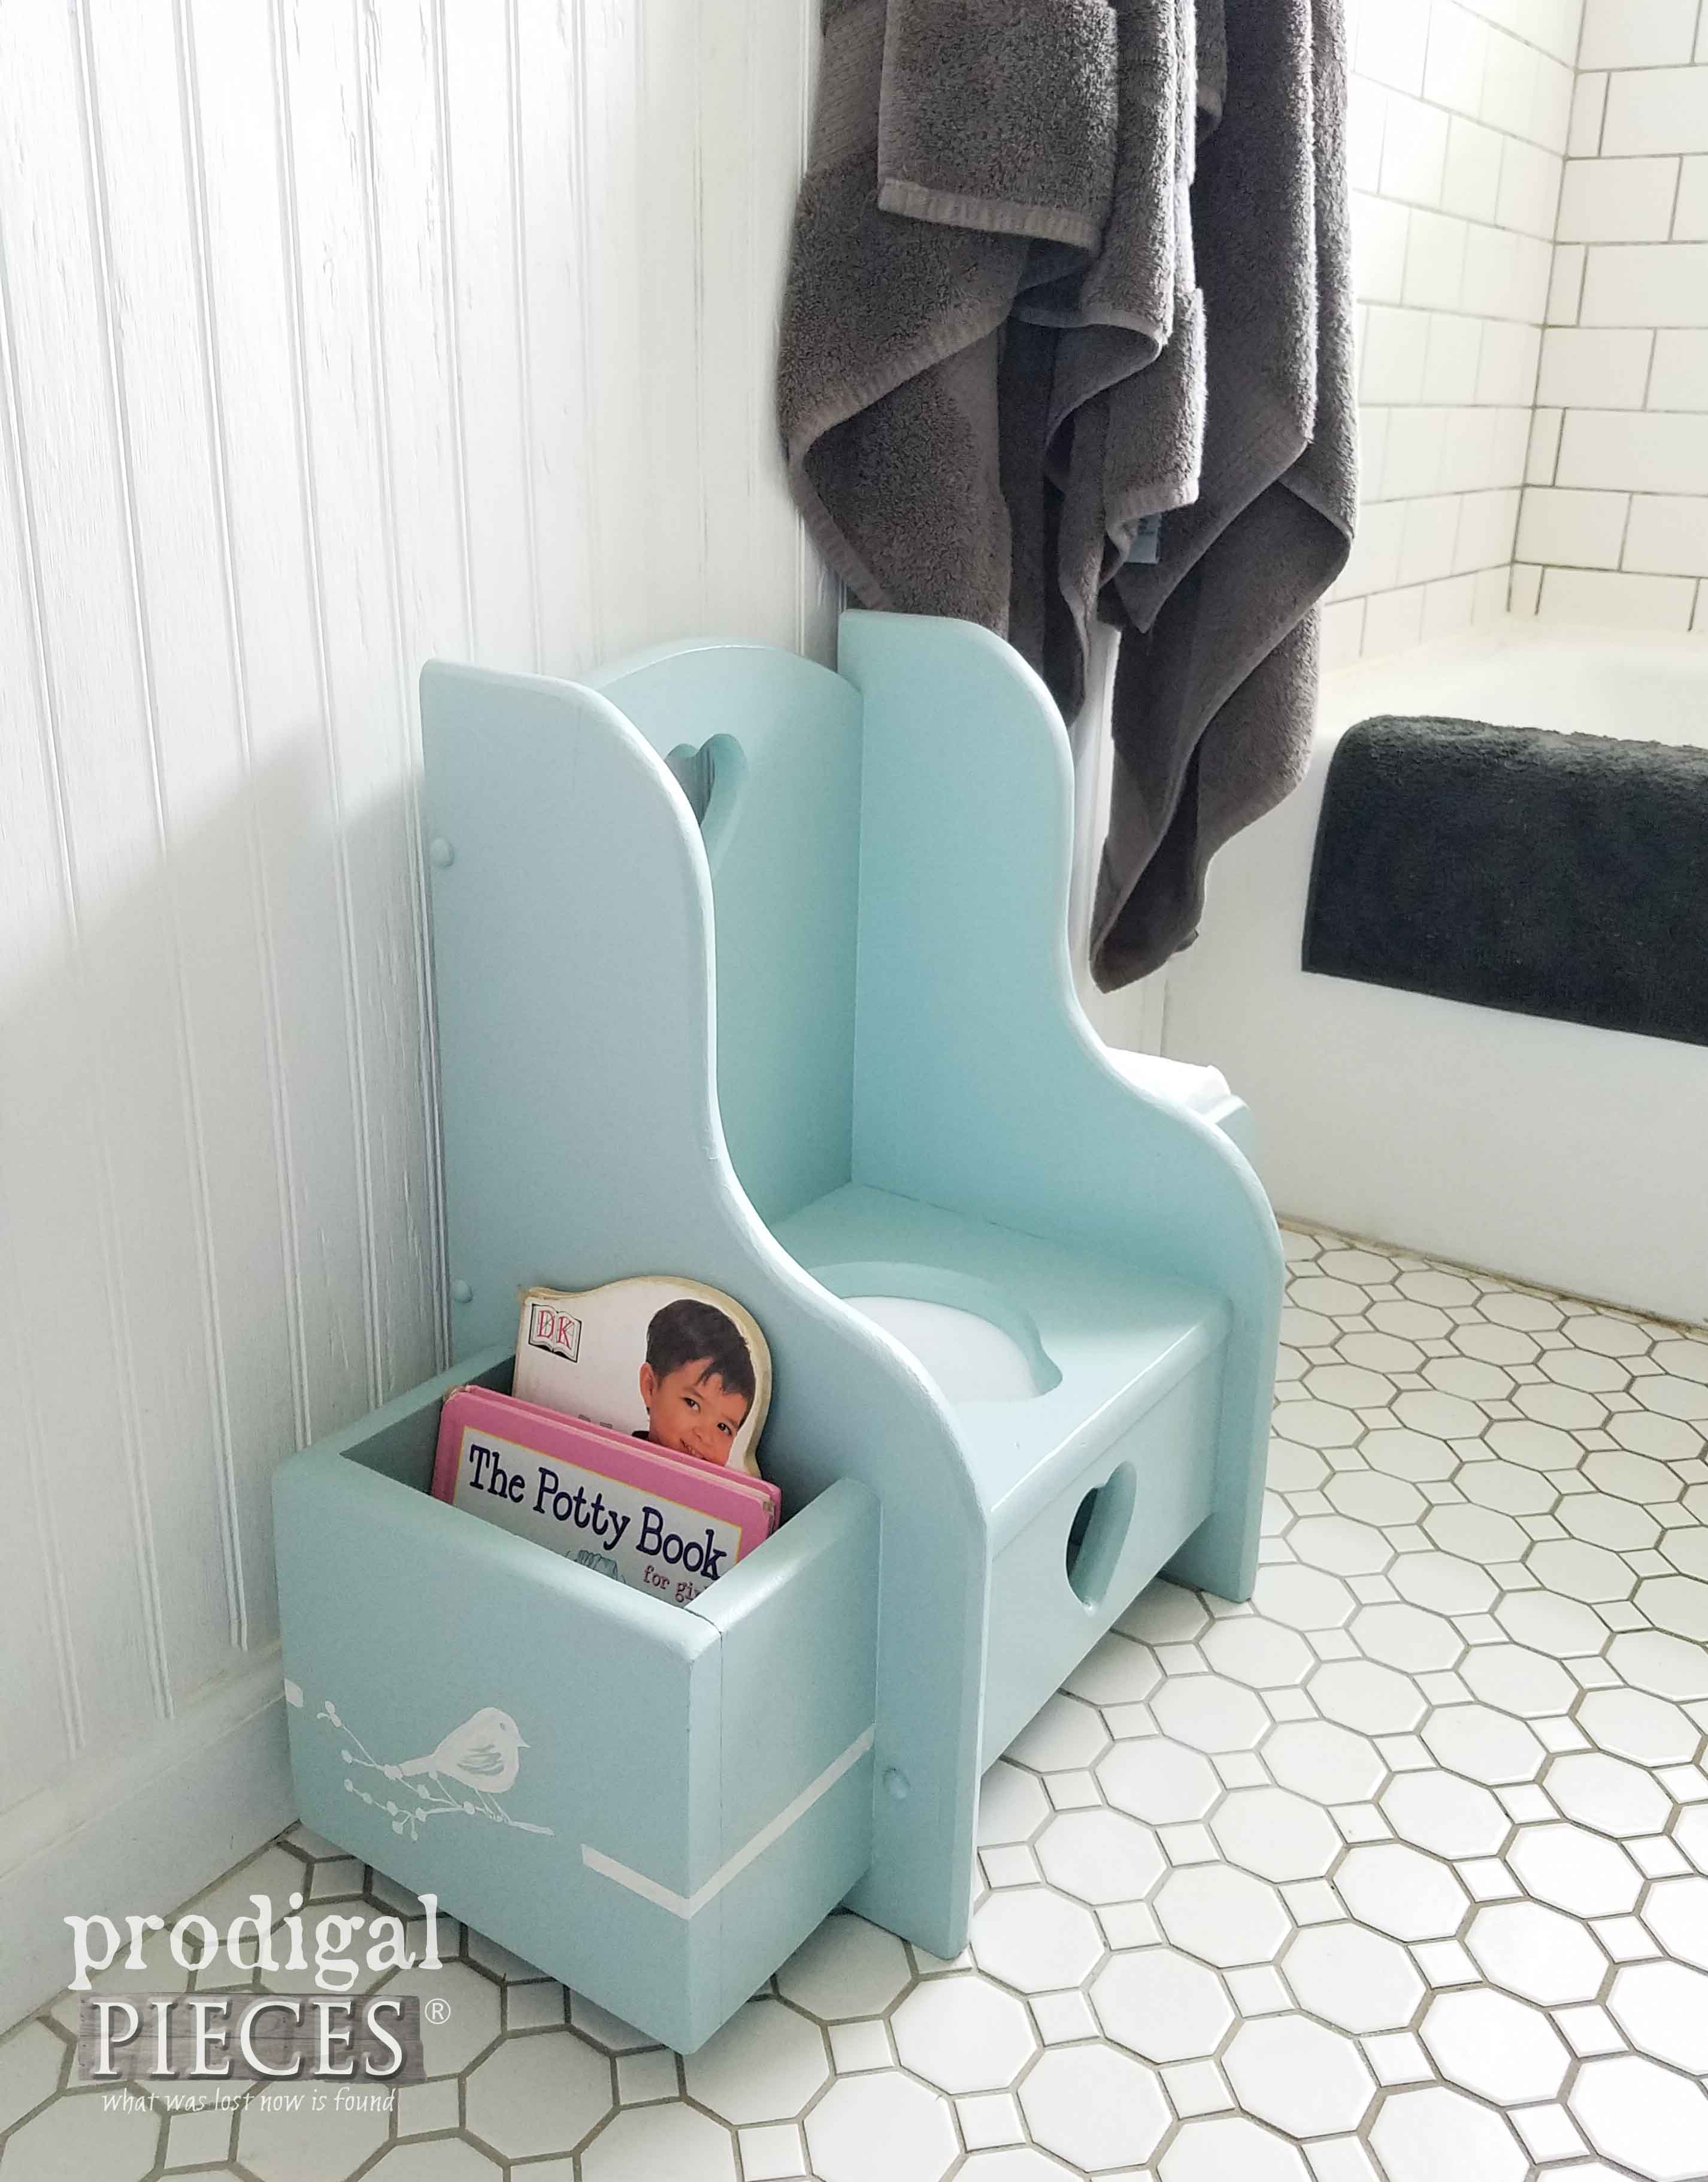 Vintage Potty Chair gets cute-factor update with paint by Prodigal Pieces | prodigalpieces.com